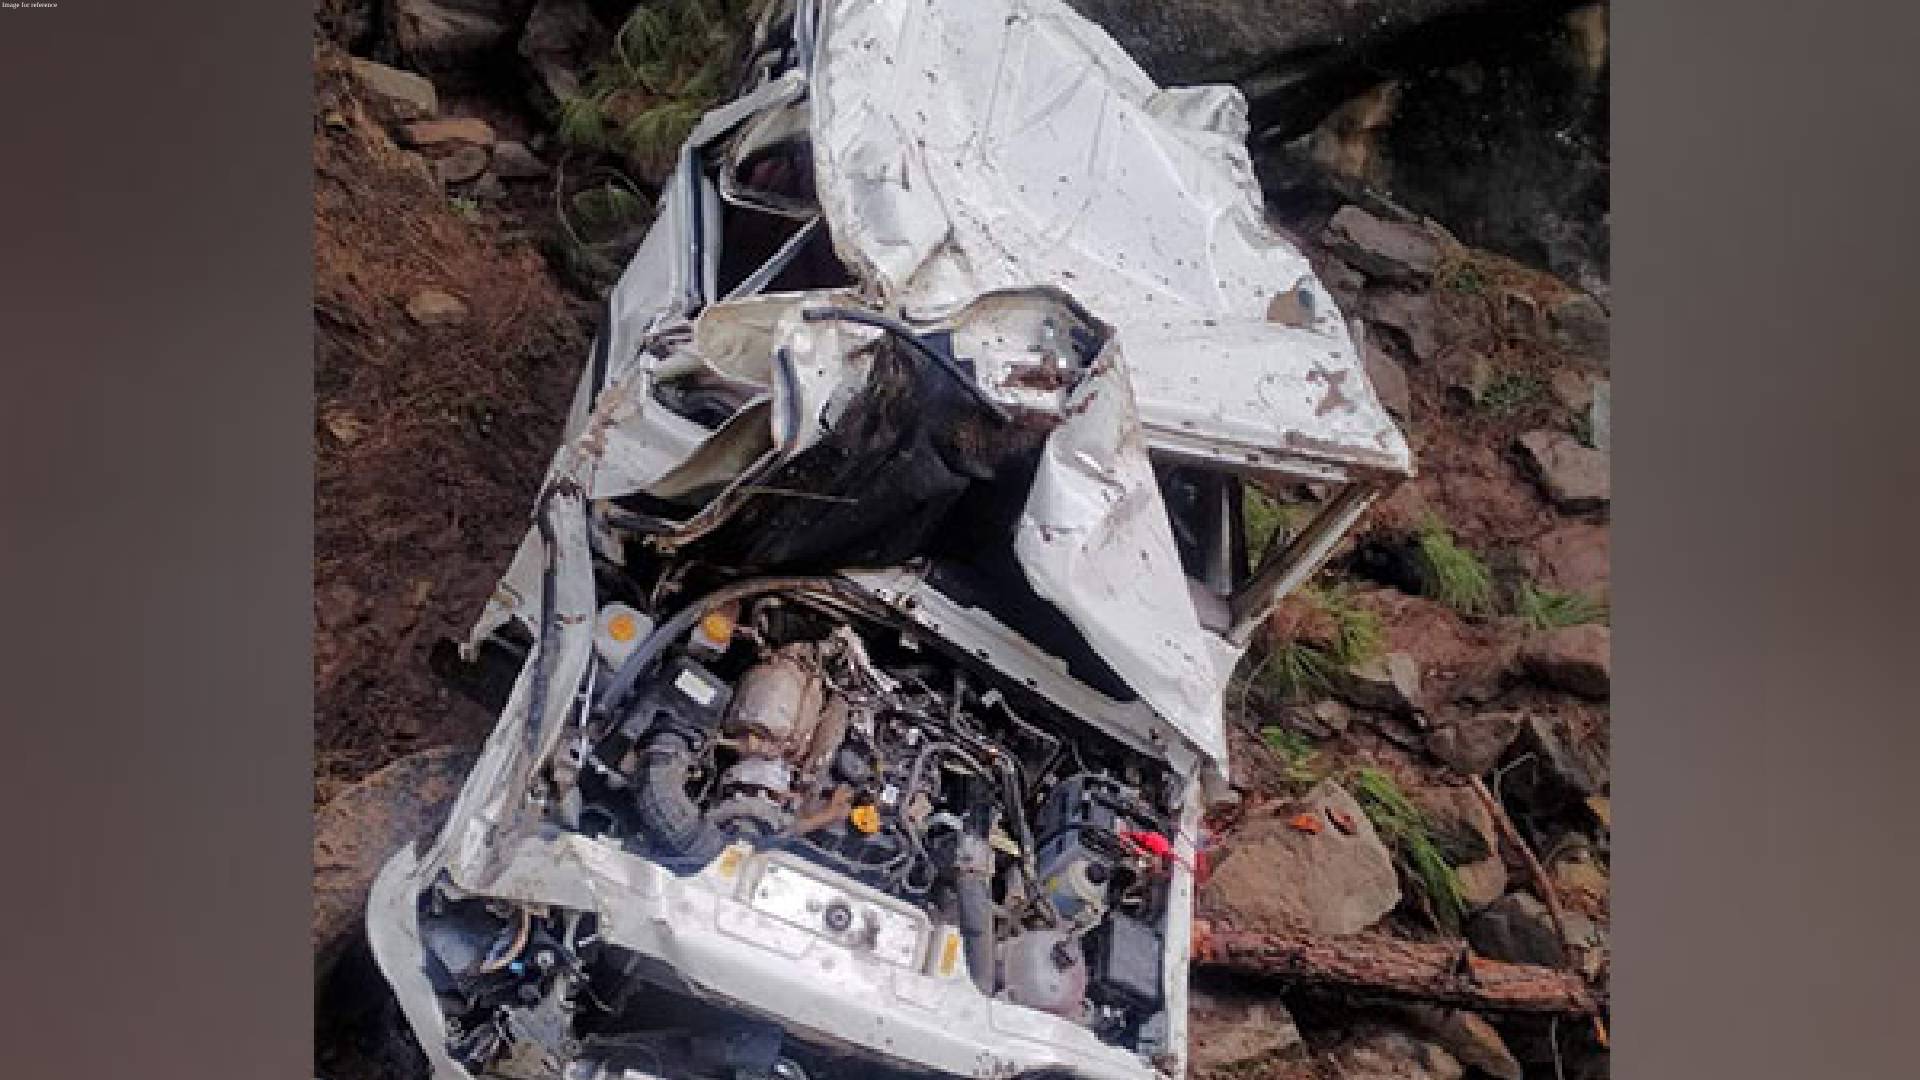 J-K: One killed, three injured after car fell into deep gorge in Udhampur